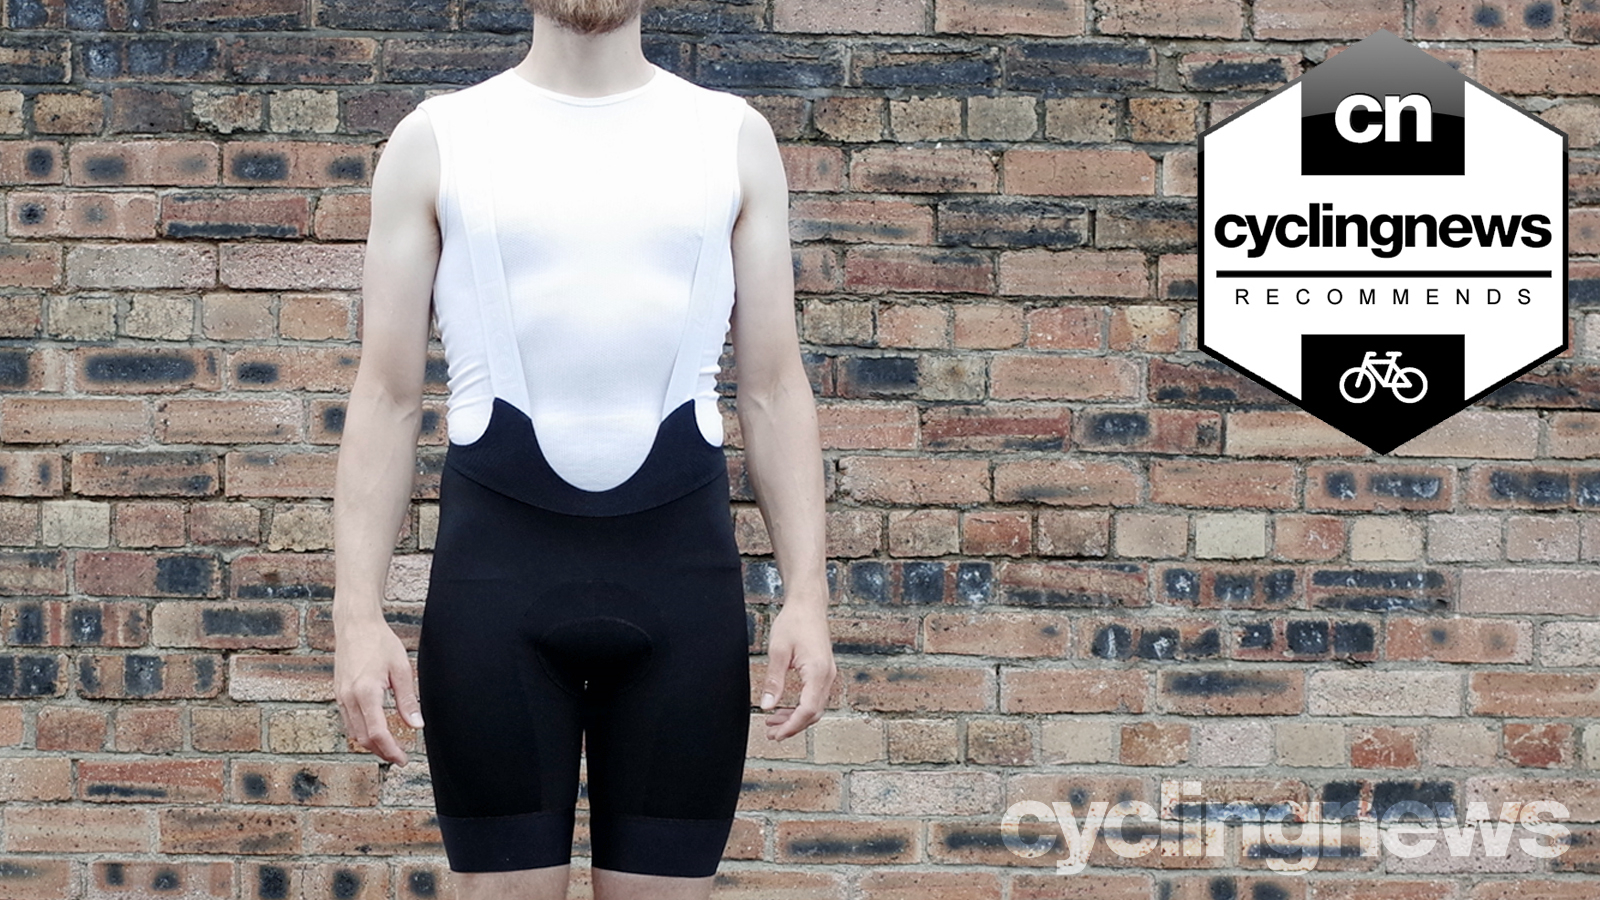 Gear Up for All-Weather Cycling Adventures: Le Col's Sport Cargo Thermal  Bib Shorts Review